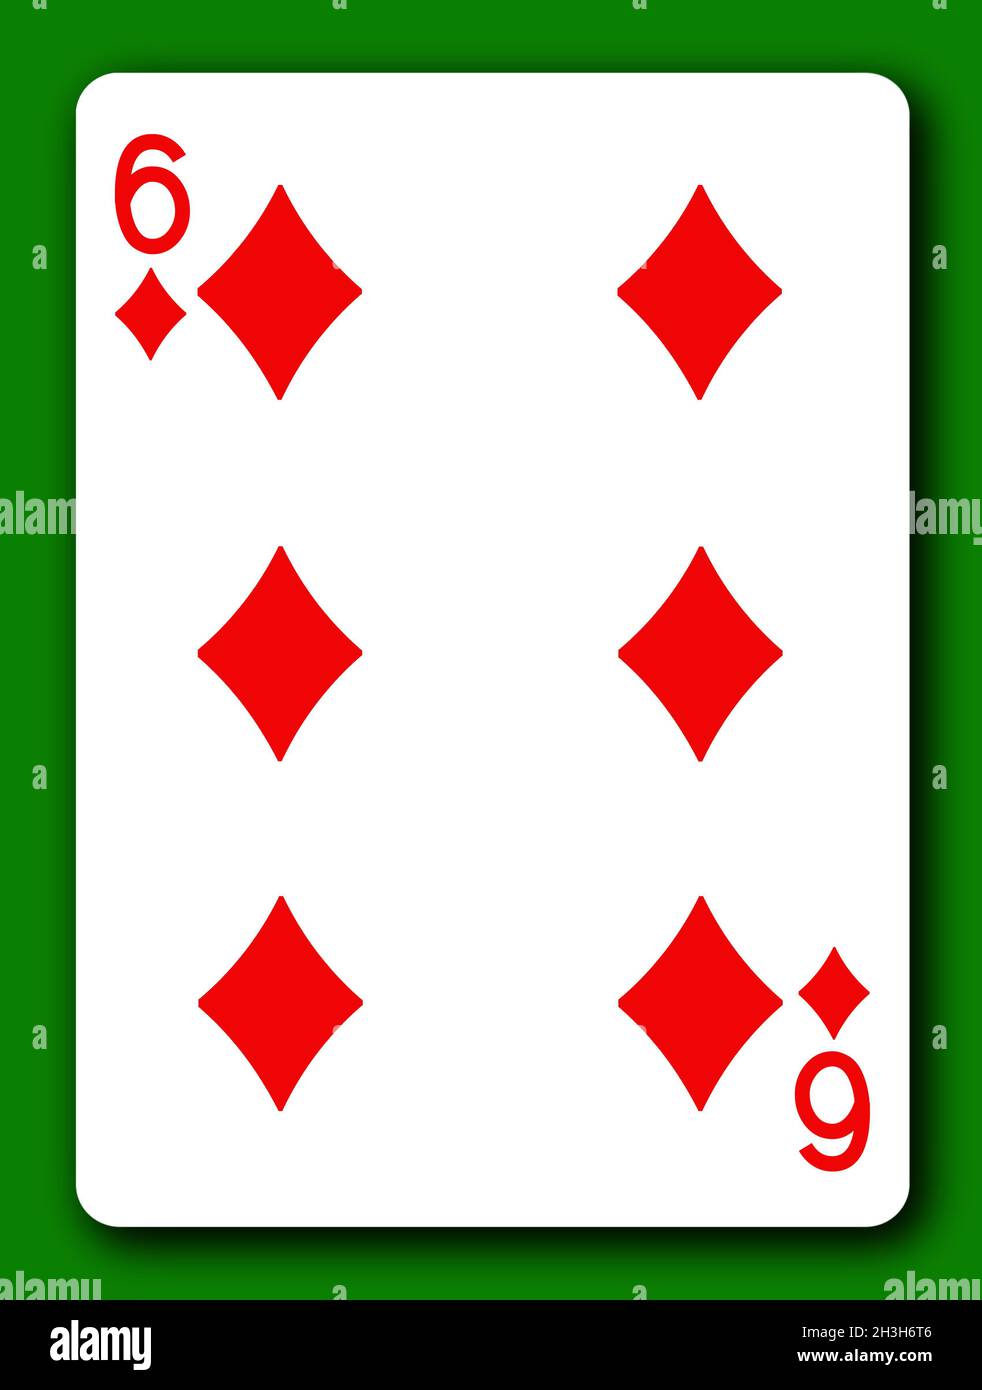 6 Six of Diamonds playing card with clipping path to remove background Stock Photo